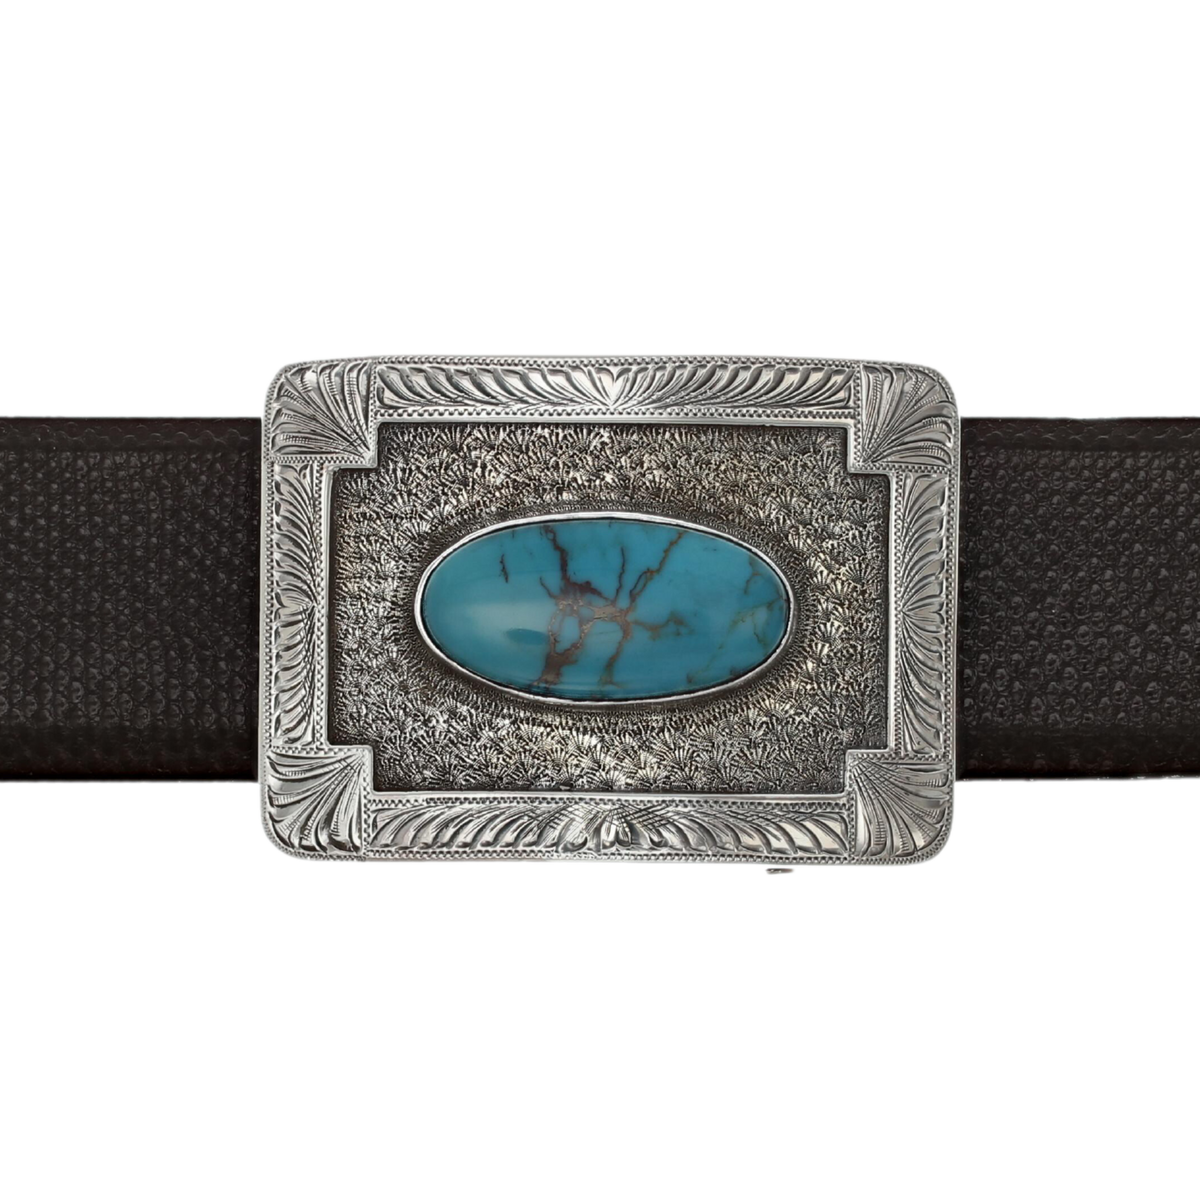 Sabine 1600 Sterling Silver Engraved Border with Turquoise Trophy Buckle